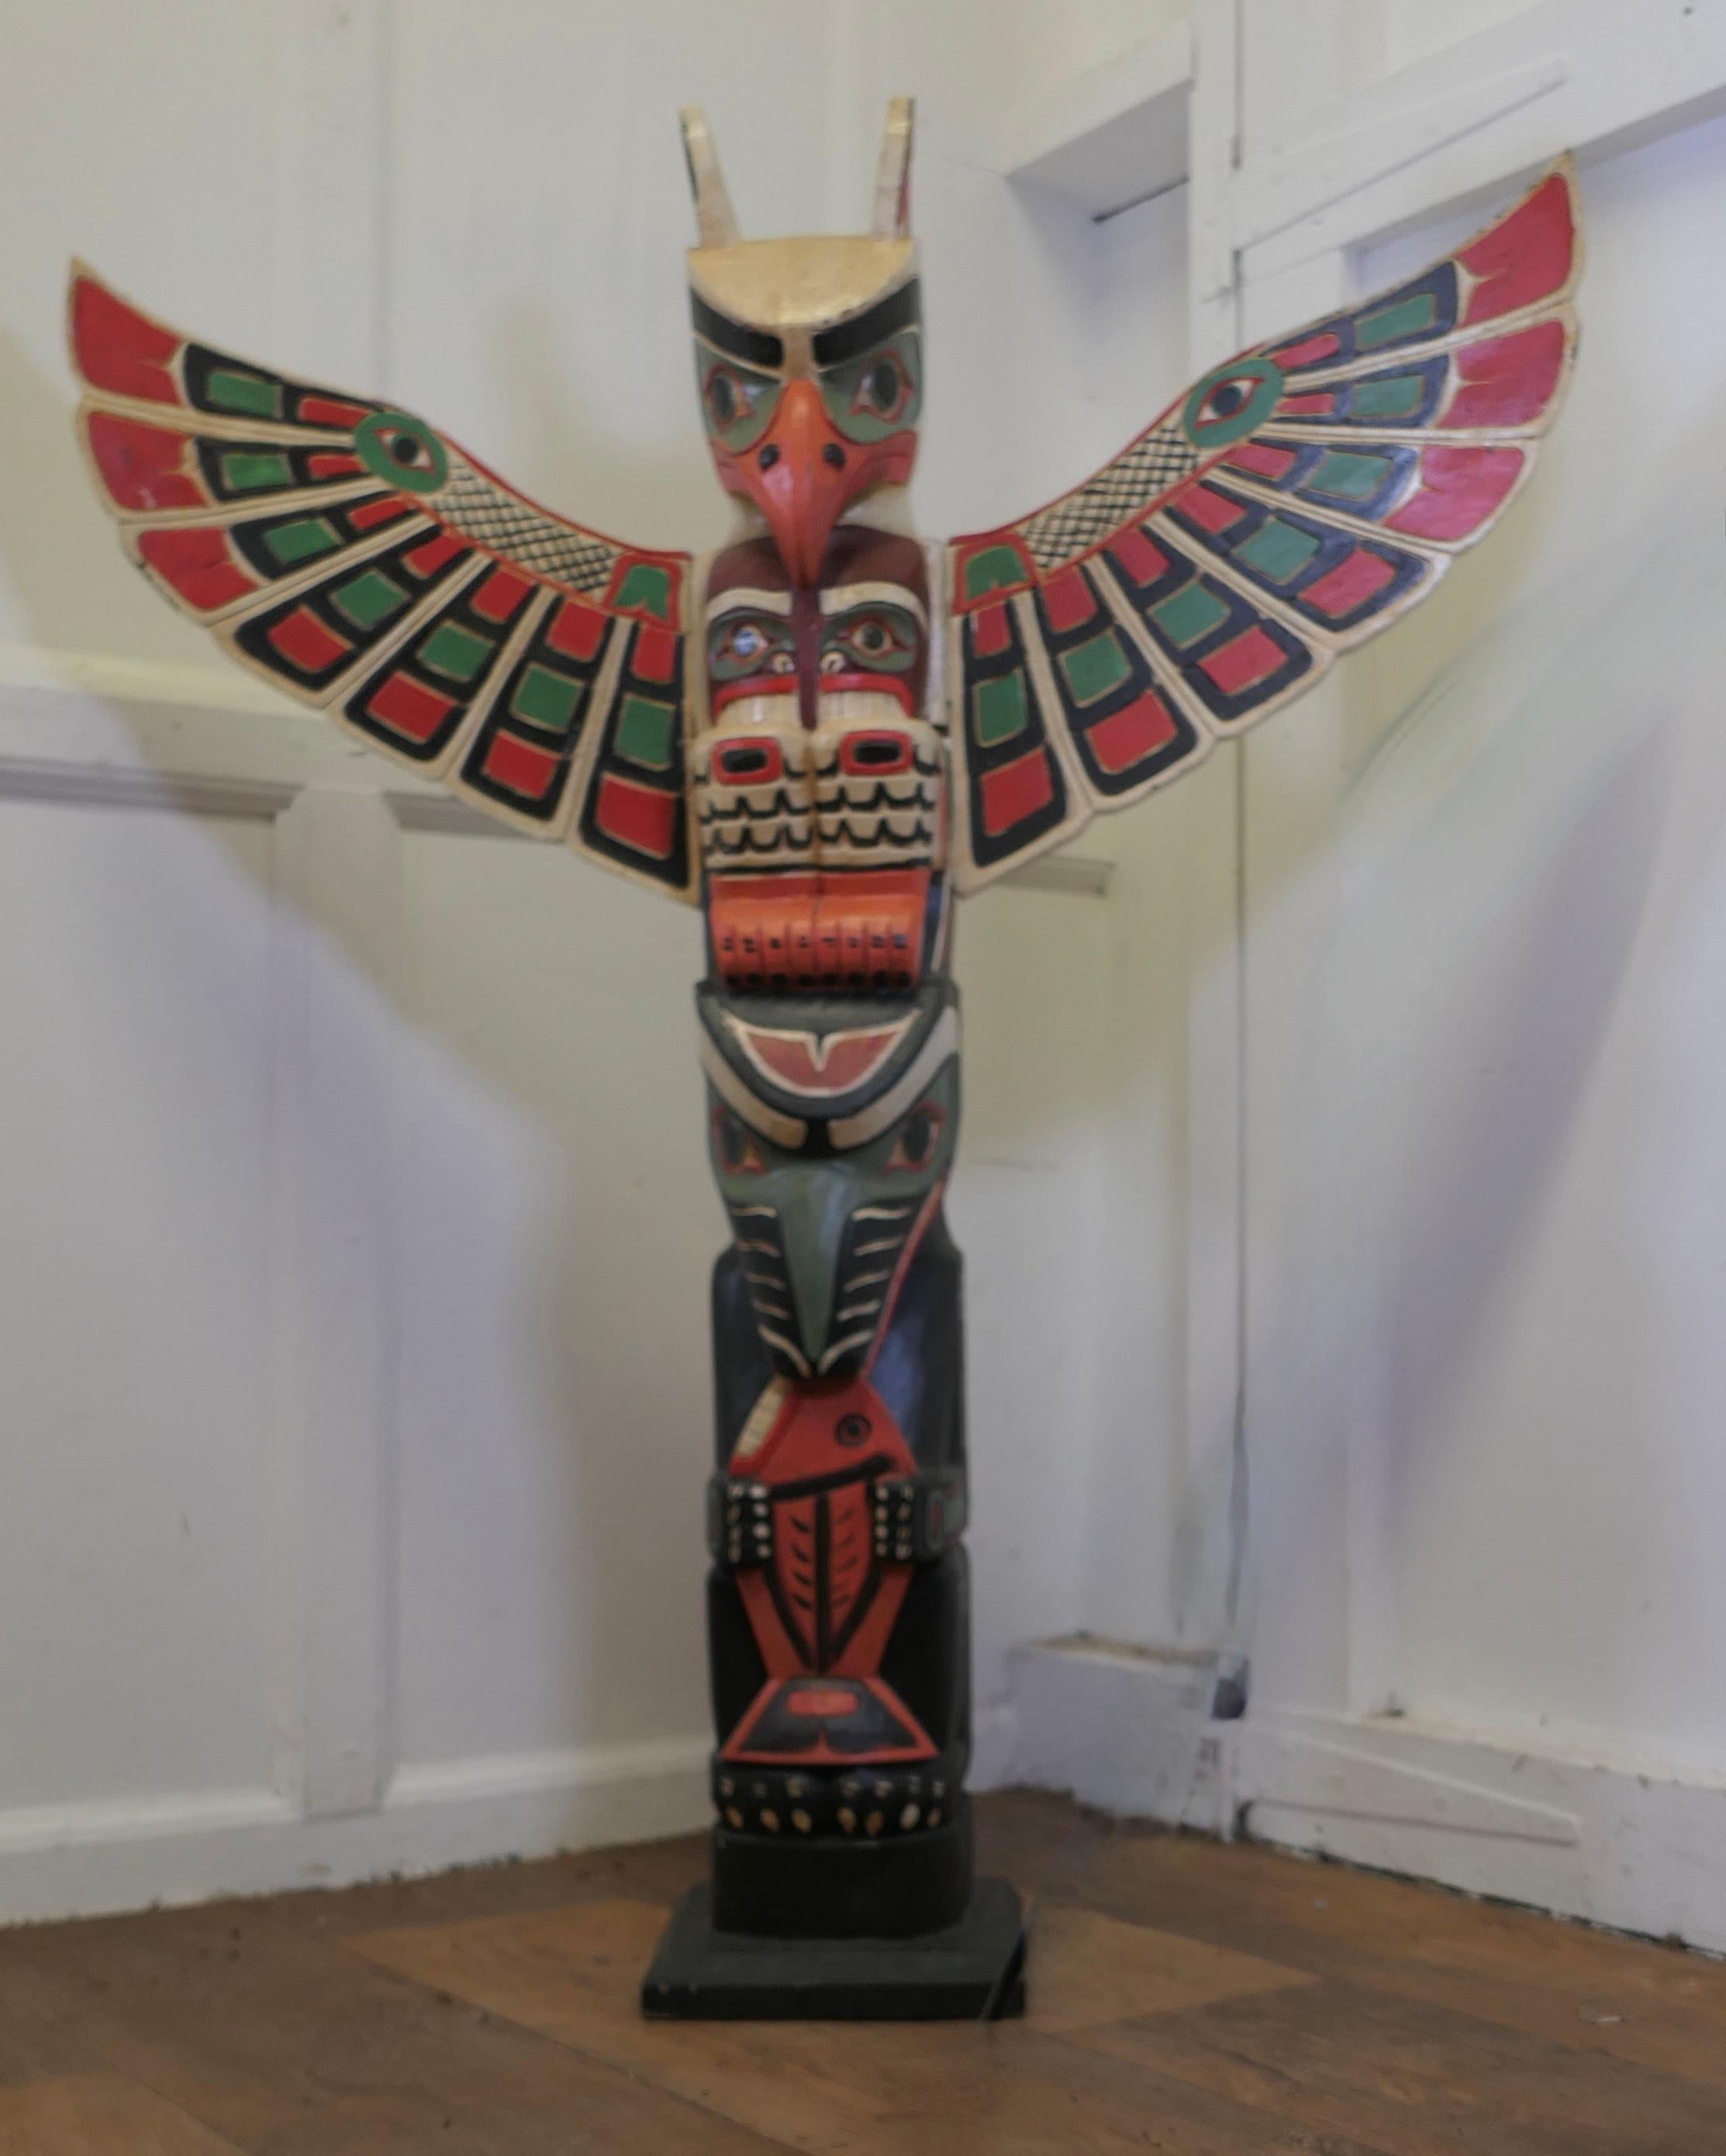 20th Century Native American Painted Totem Pole

A painted animal totem. 
Animal totems are believed to have spiritual significance, watching over Pacific Northwest Indian tribes and families. 

This totem features an eagle or thunderbird at the top